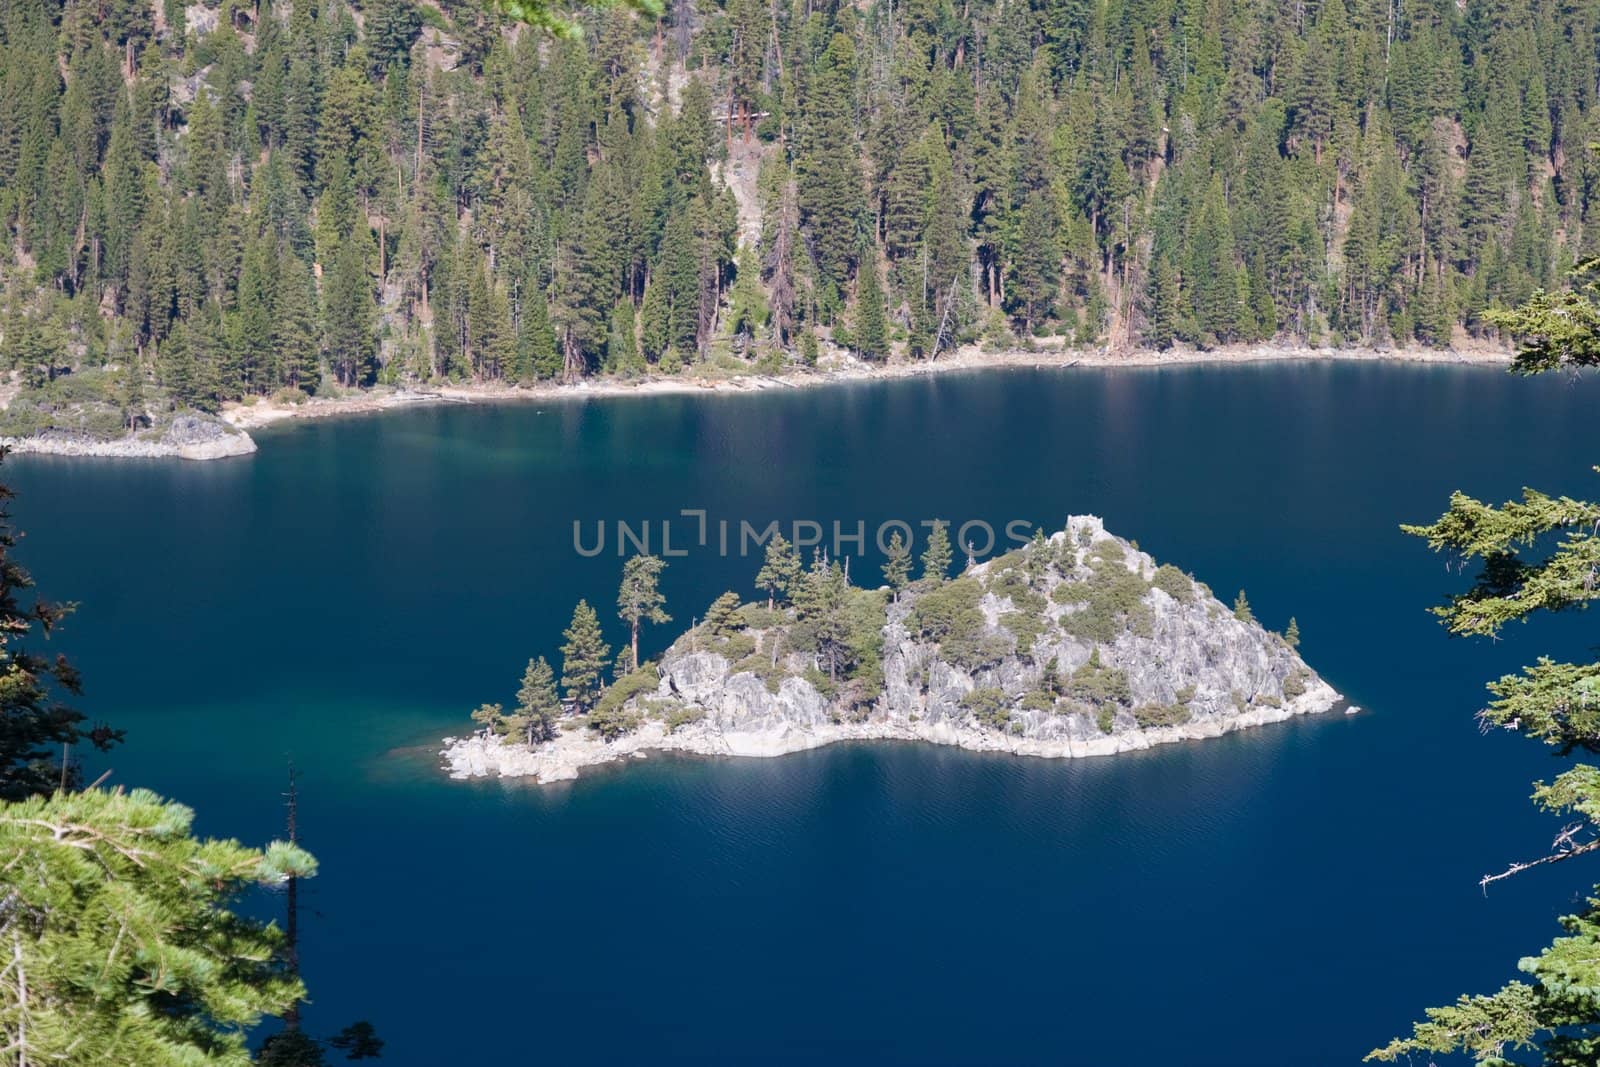 Island in middle of mountain lake by timscottrom